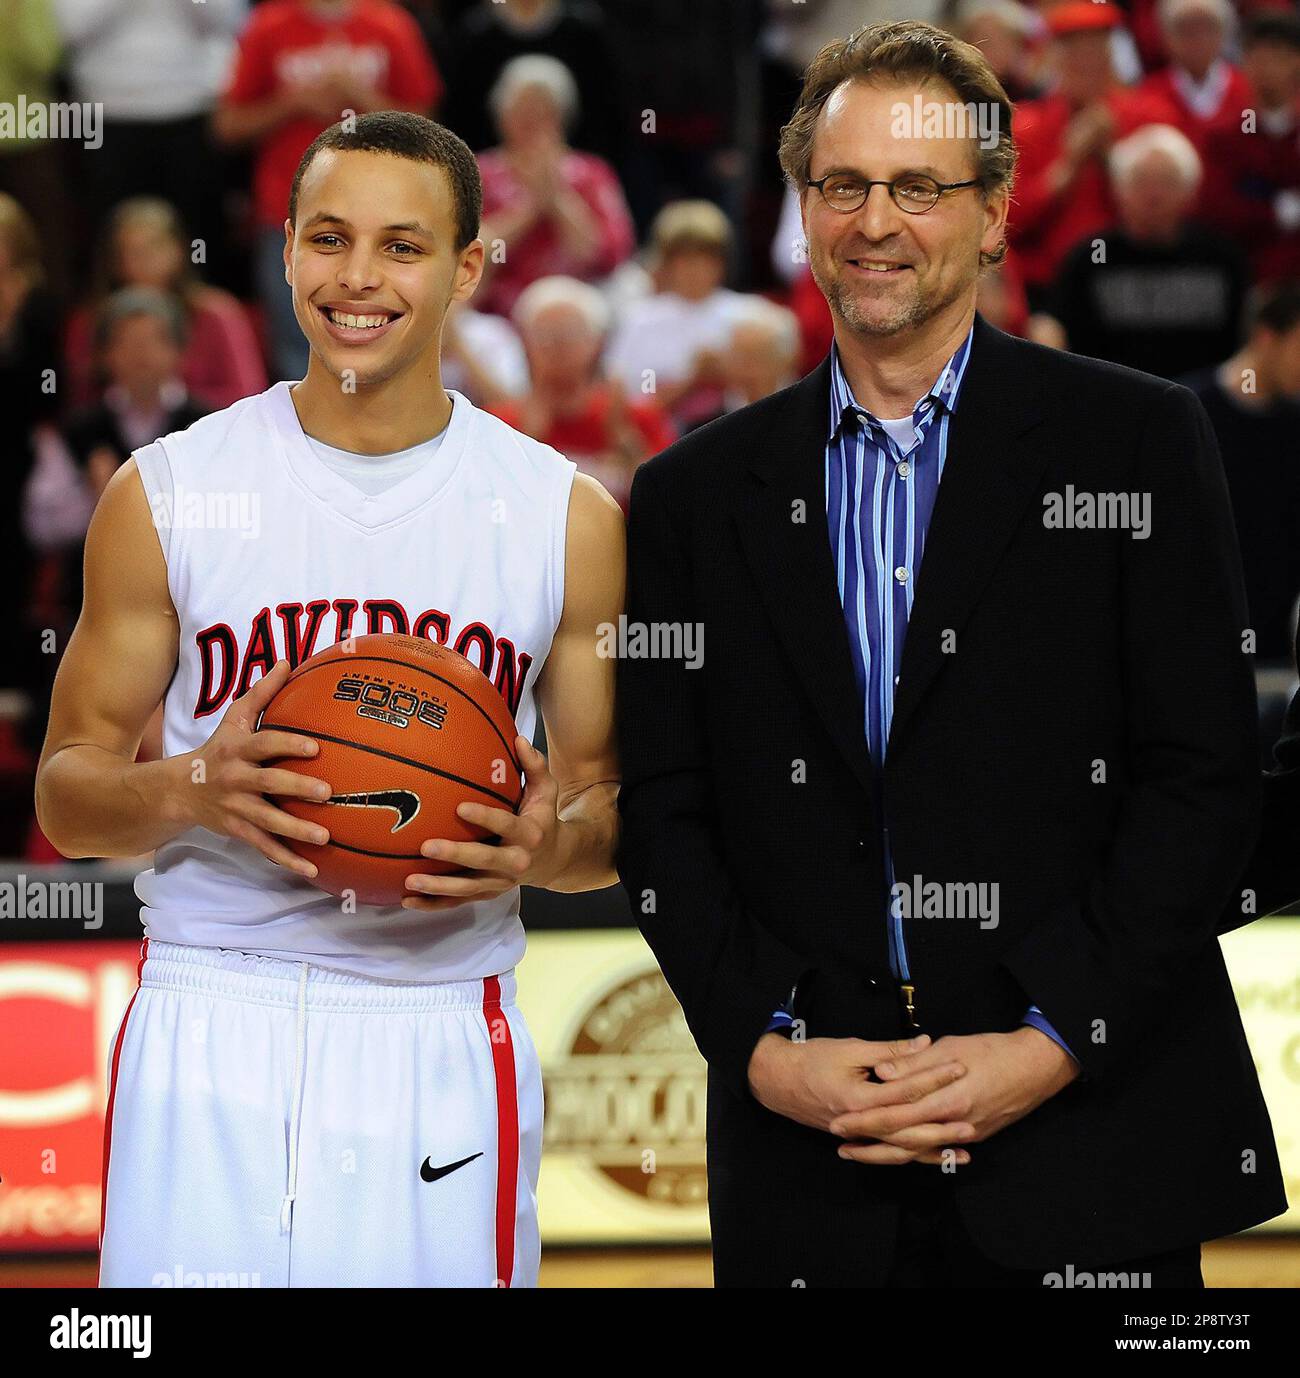  STEPHEN CURRY DAVIDSON WILDCATS 8X10 SPORTS ACTION